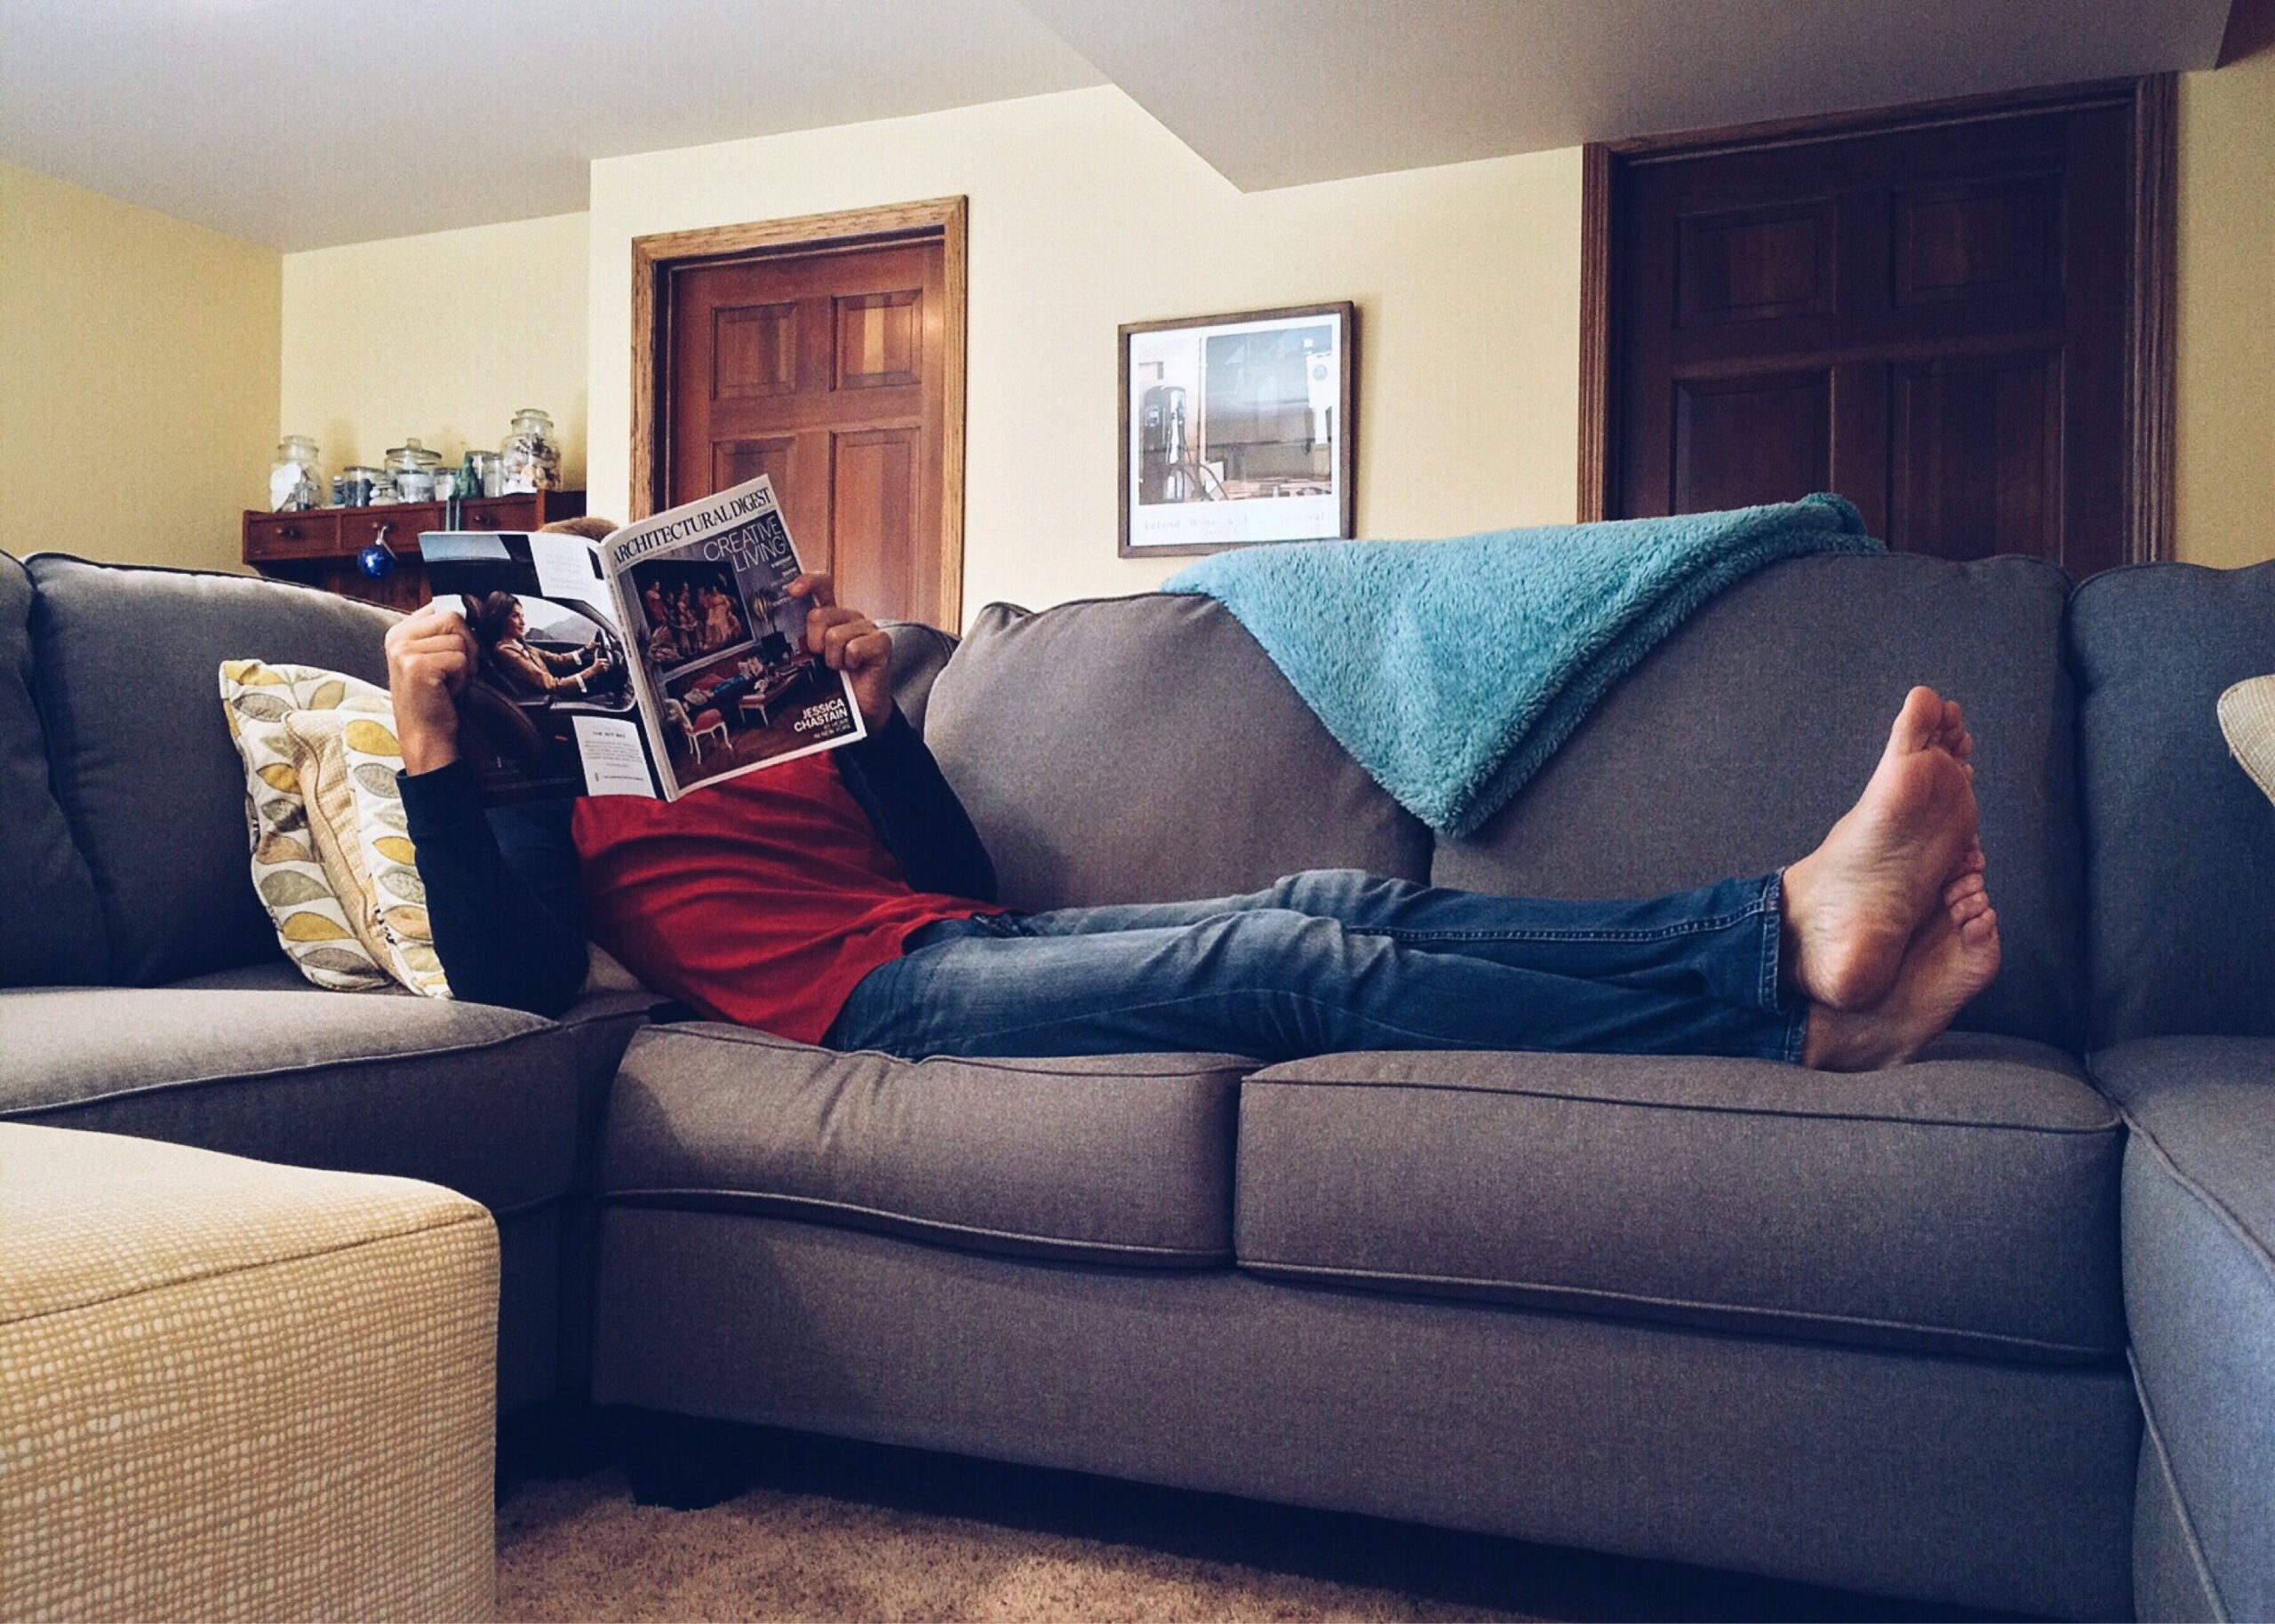 A man reading a magazine on the couch